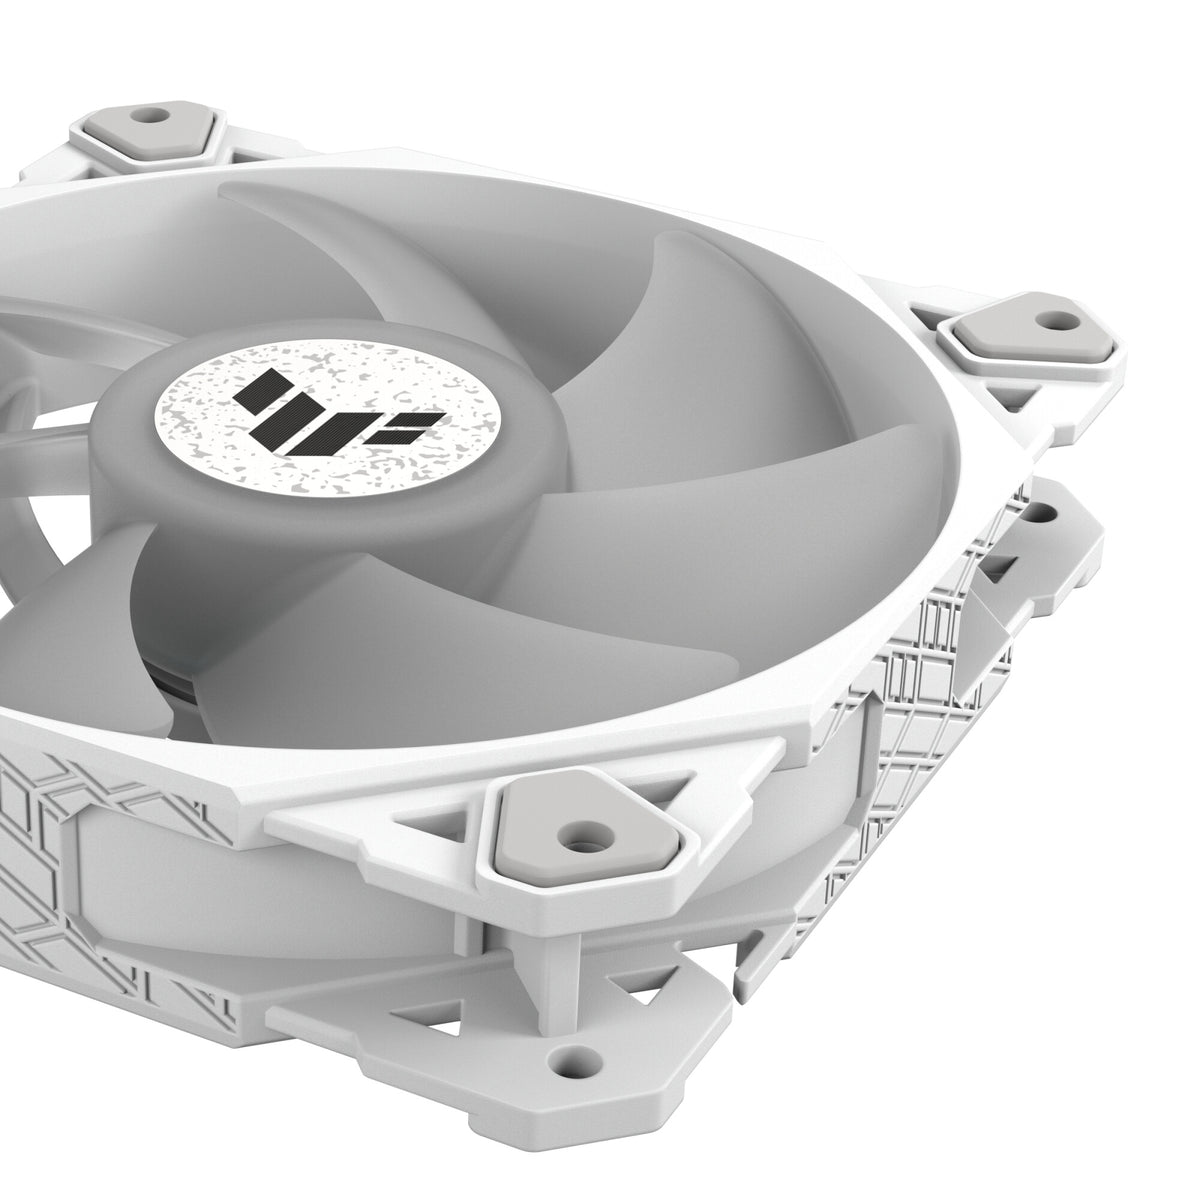 ASUS TUF GAMING TF120 ARGB - Computer Case Fan in White - 120mm (Pack of 3)